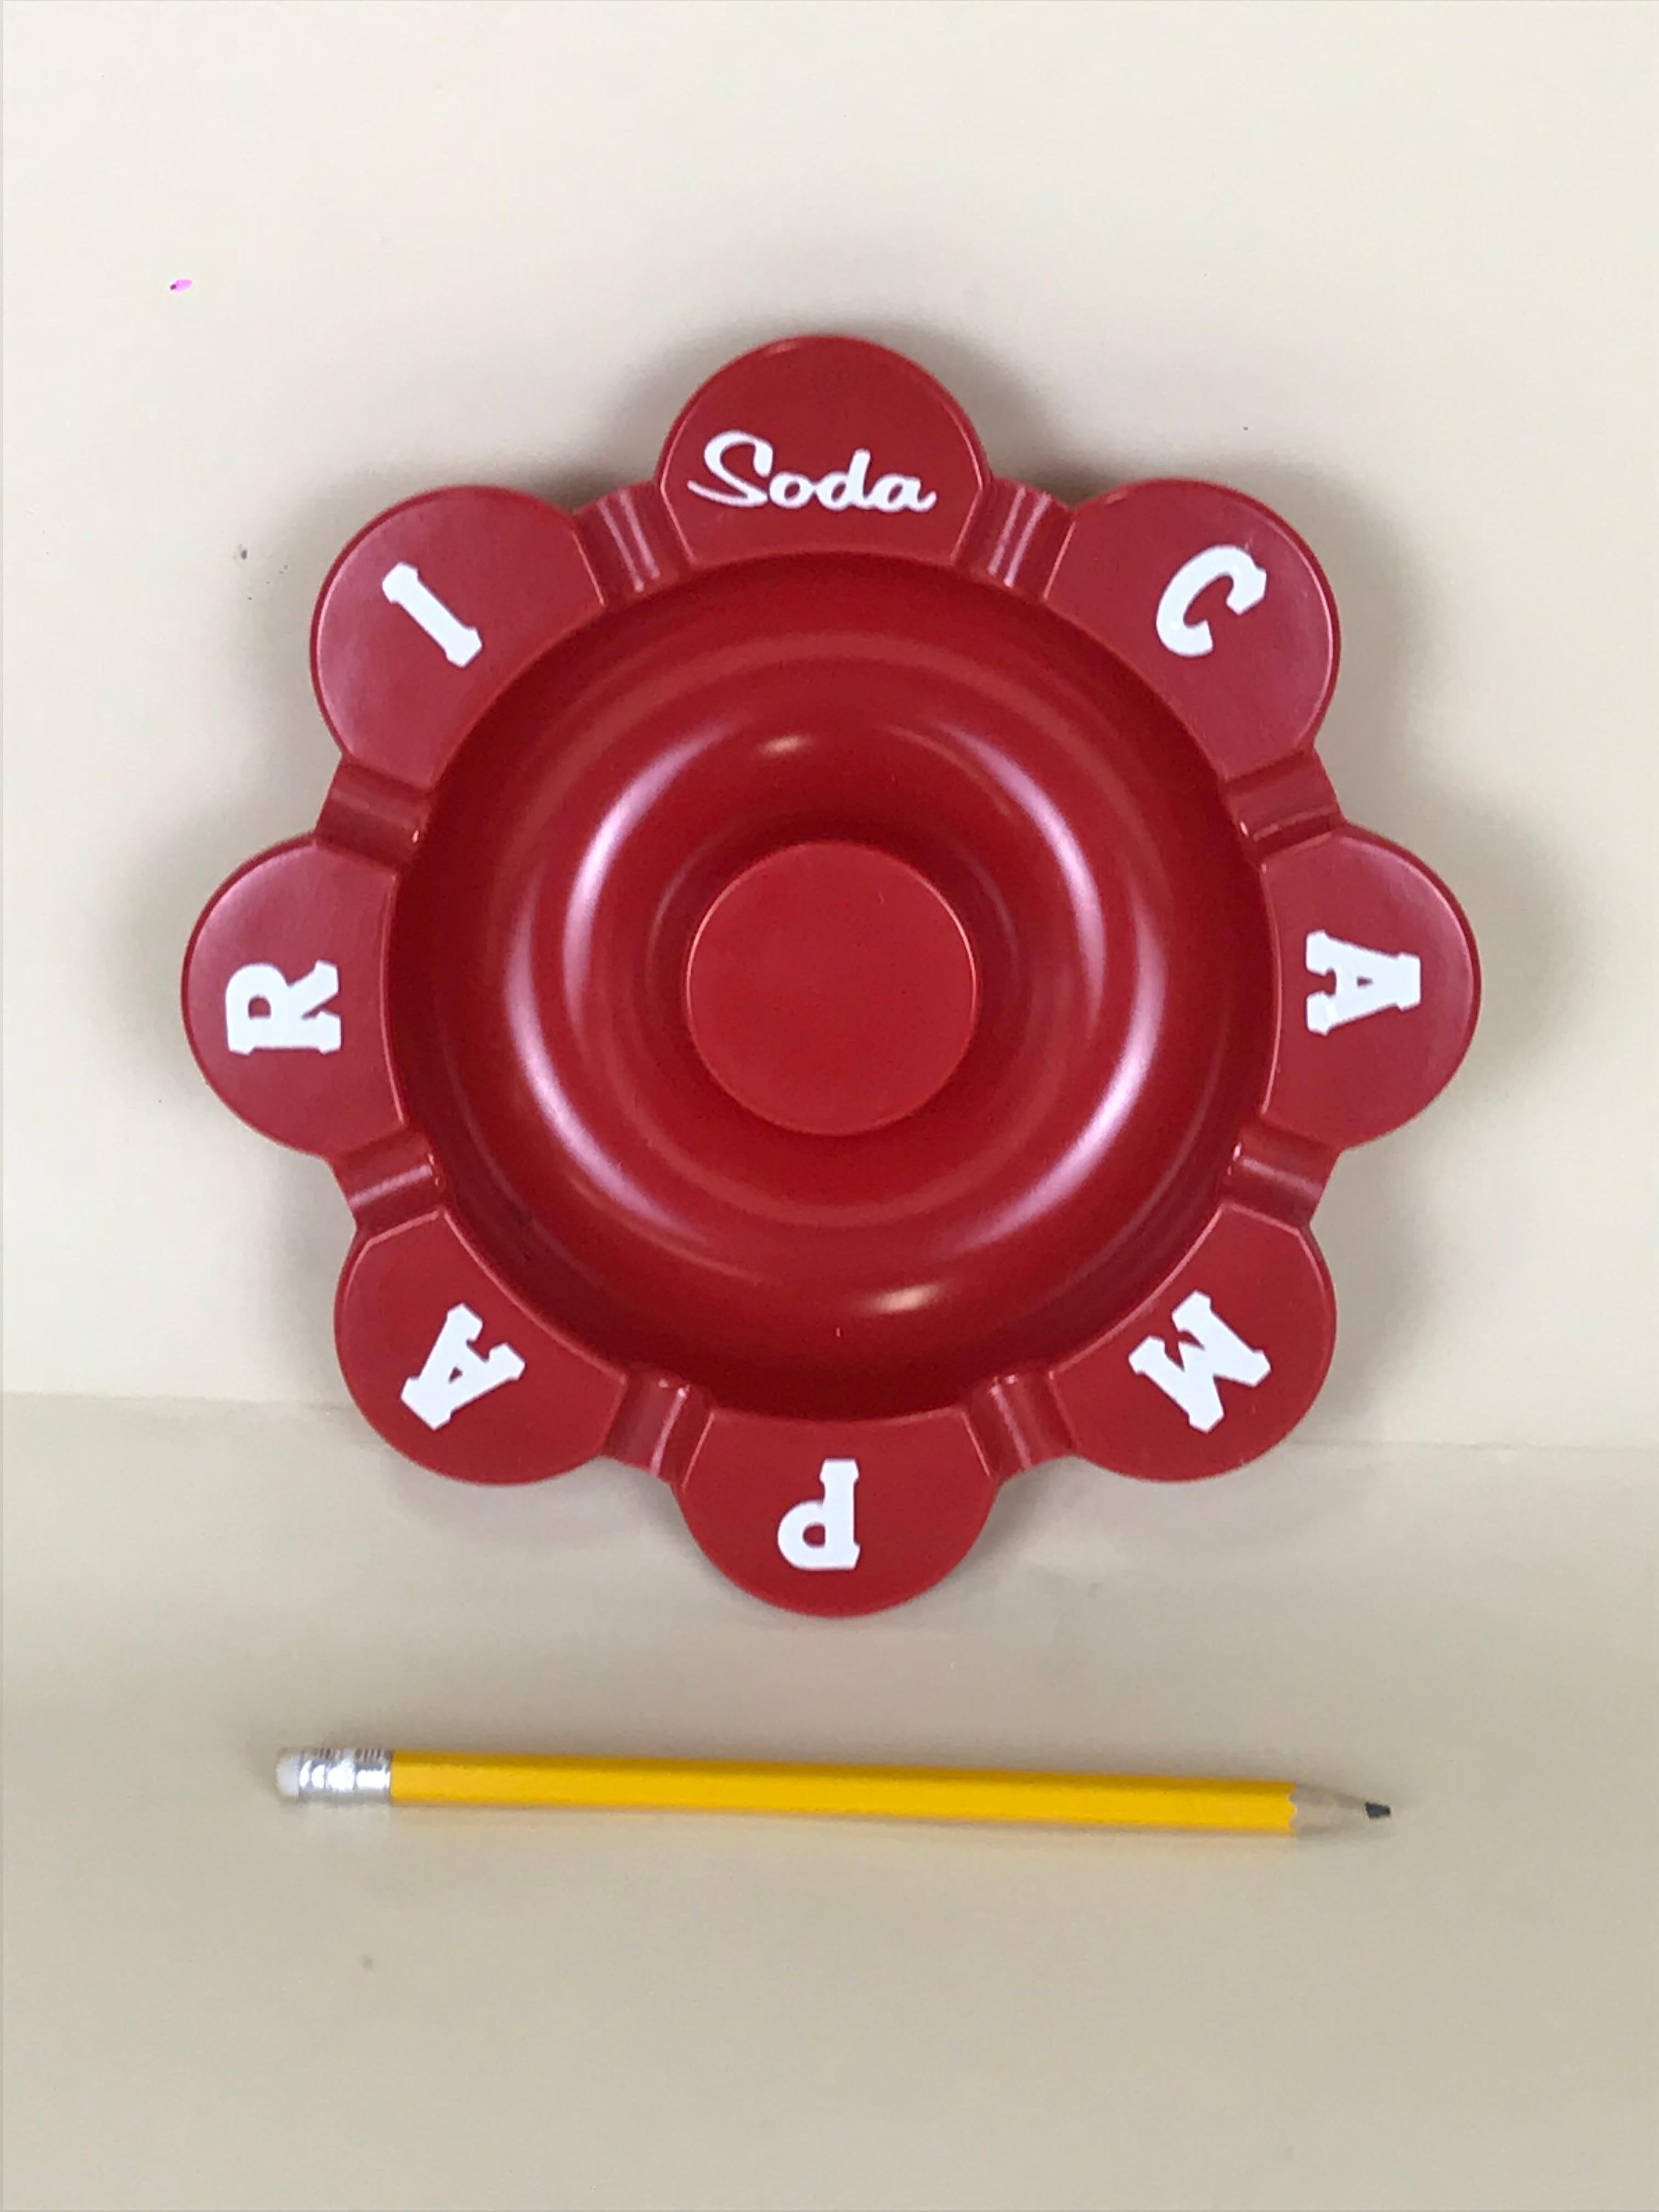 Original Campari Soda advertising ashtray in red rigid plastic designed by Thun Design in 1985/86.

Collector's note:

Campari is an Italian alcoholic liqueur, considered an apéritif obtained from the infusion of herbs and fruit in alcohol and